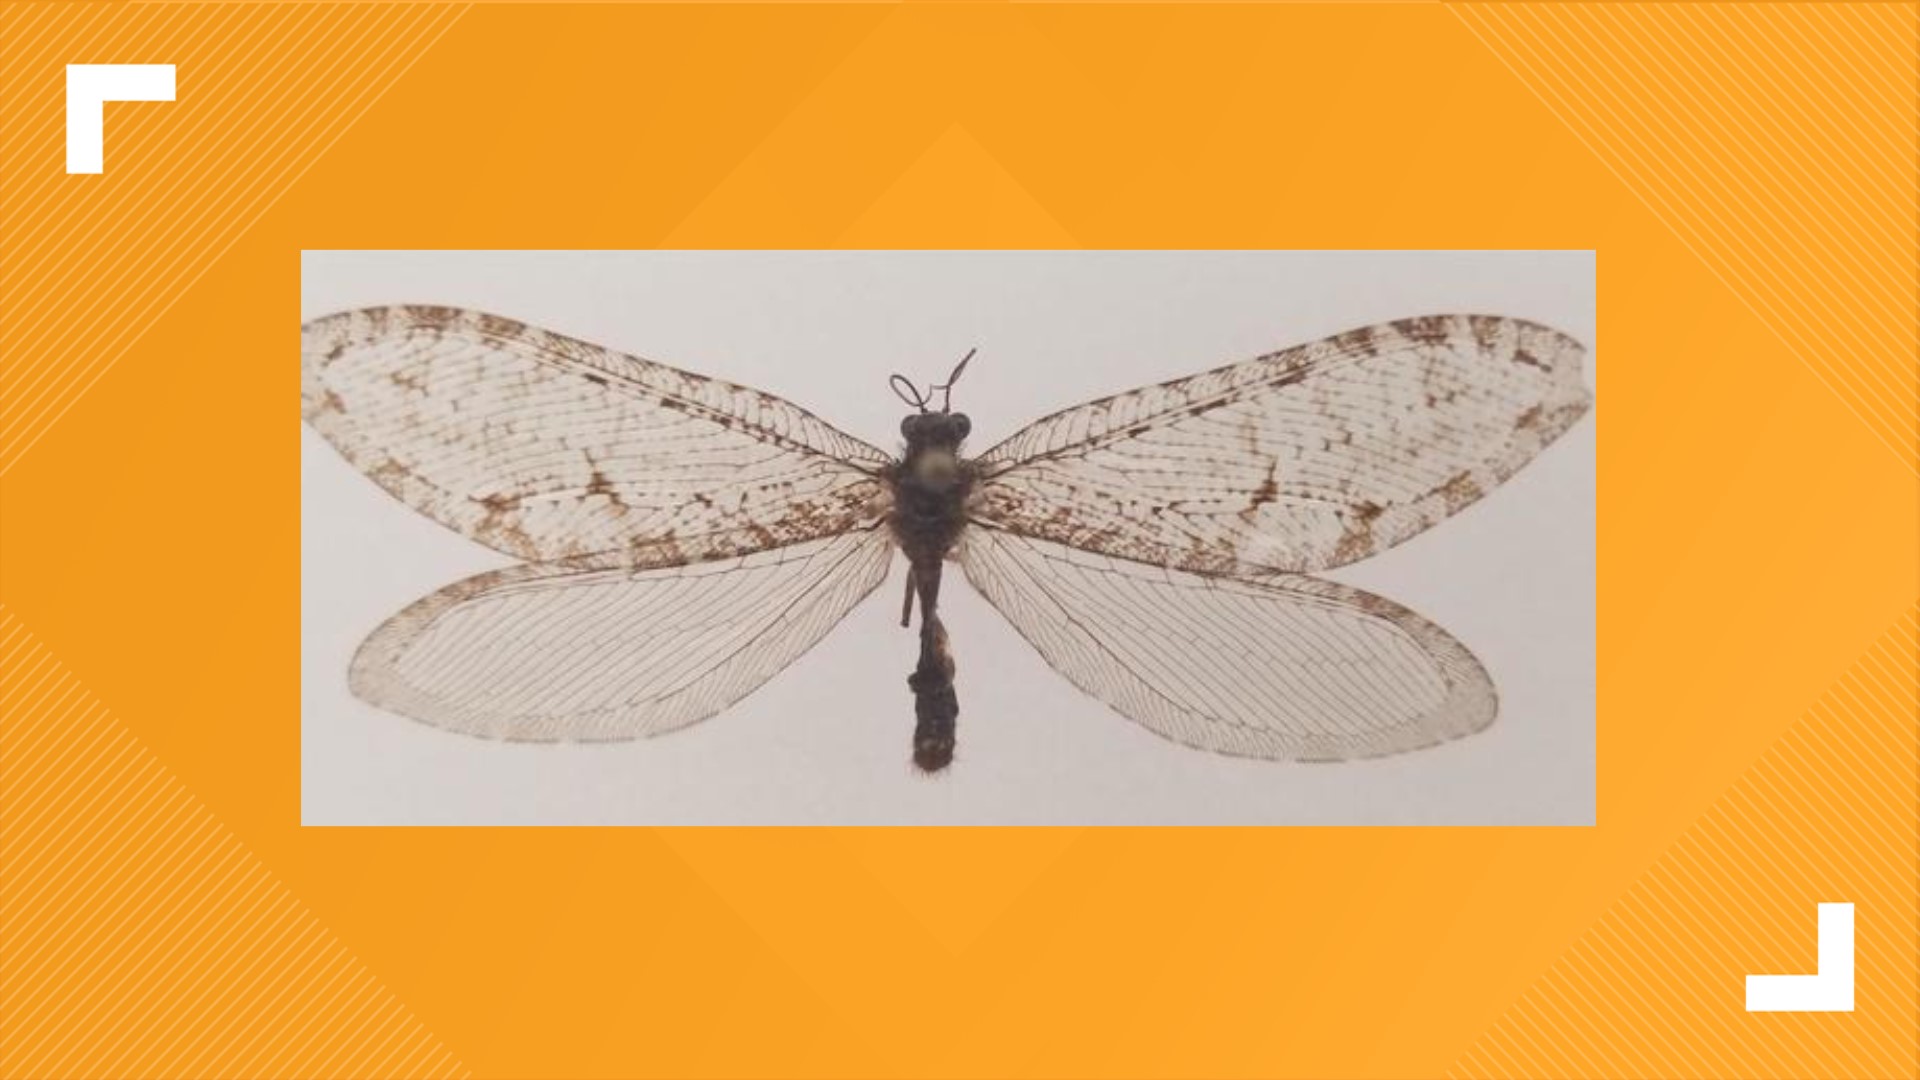 The giant lacewing was found in 2012 by a PhD student.